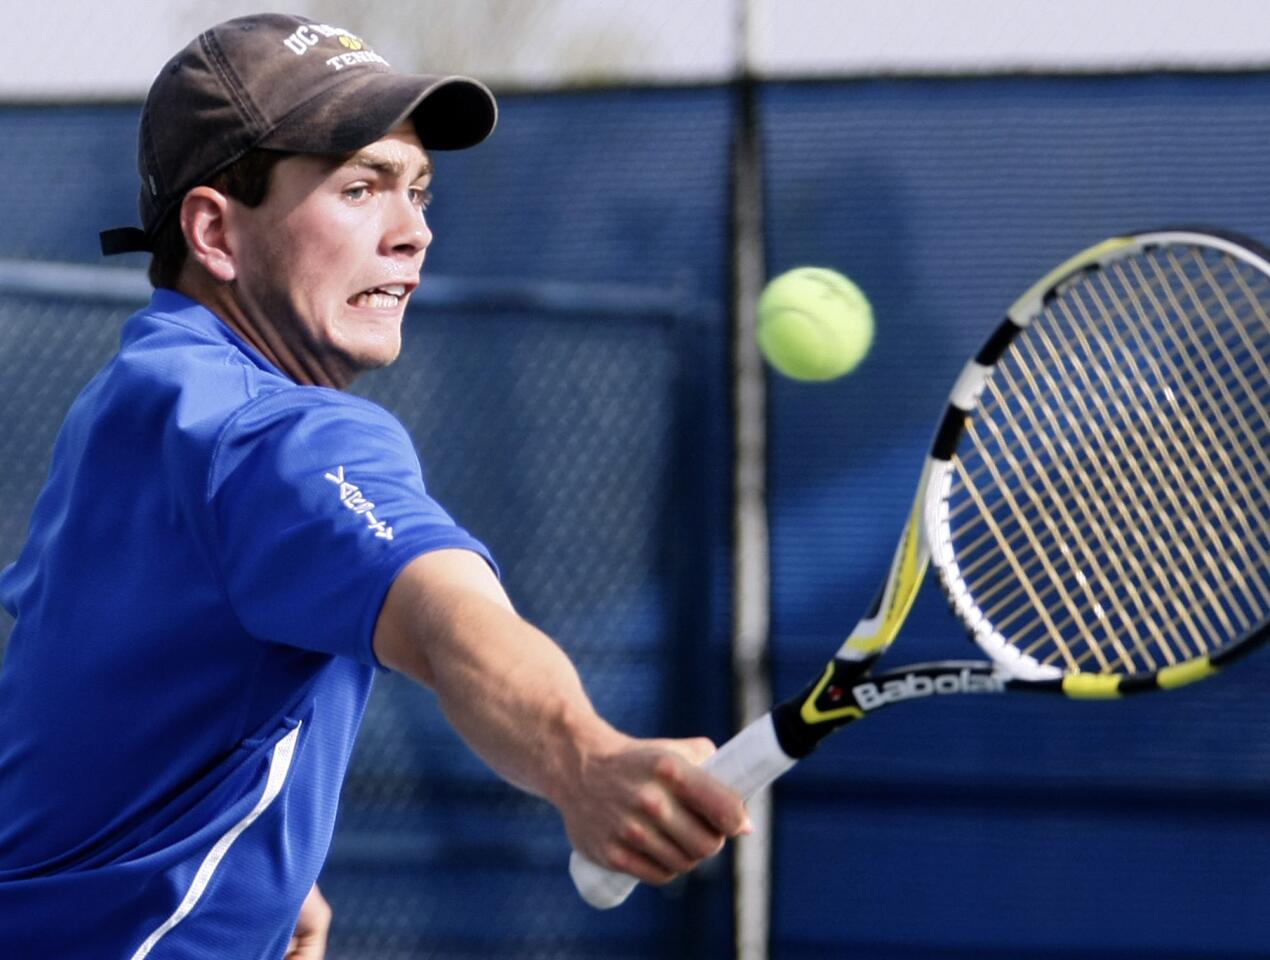 San Marino High School's tennis player James Wade returns the ball during doubles match at home vs. La Canada High School in San Marino on Thursday, March 28, 2013.